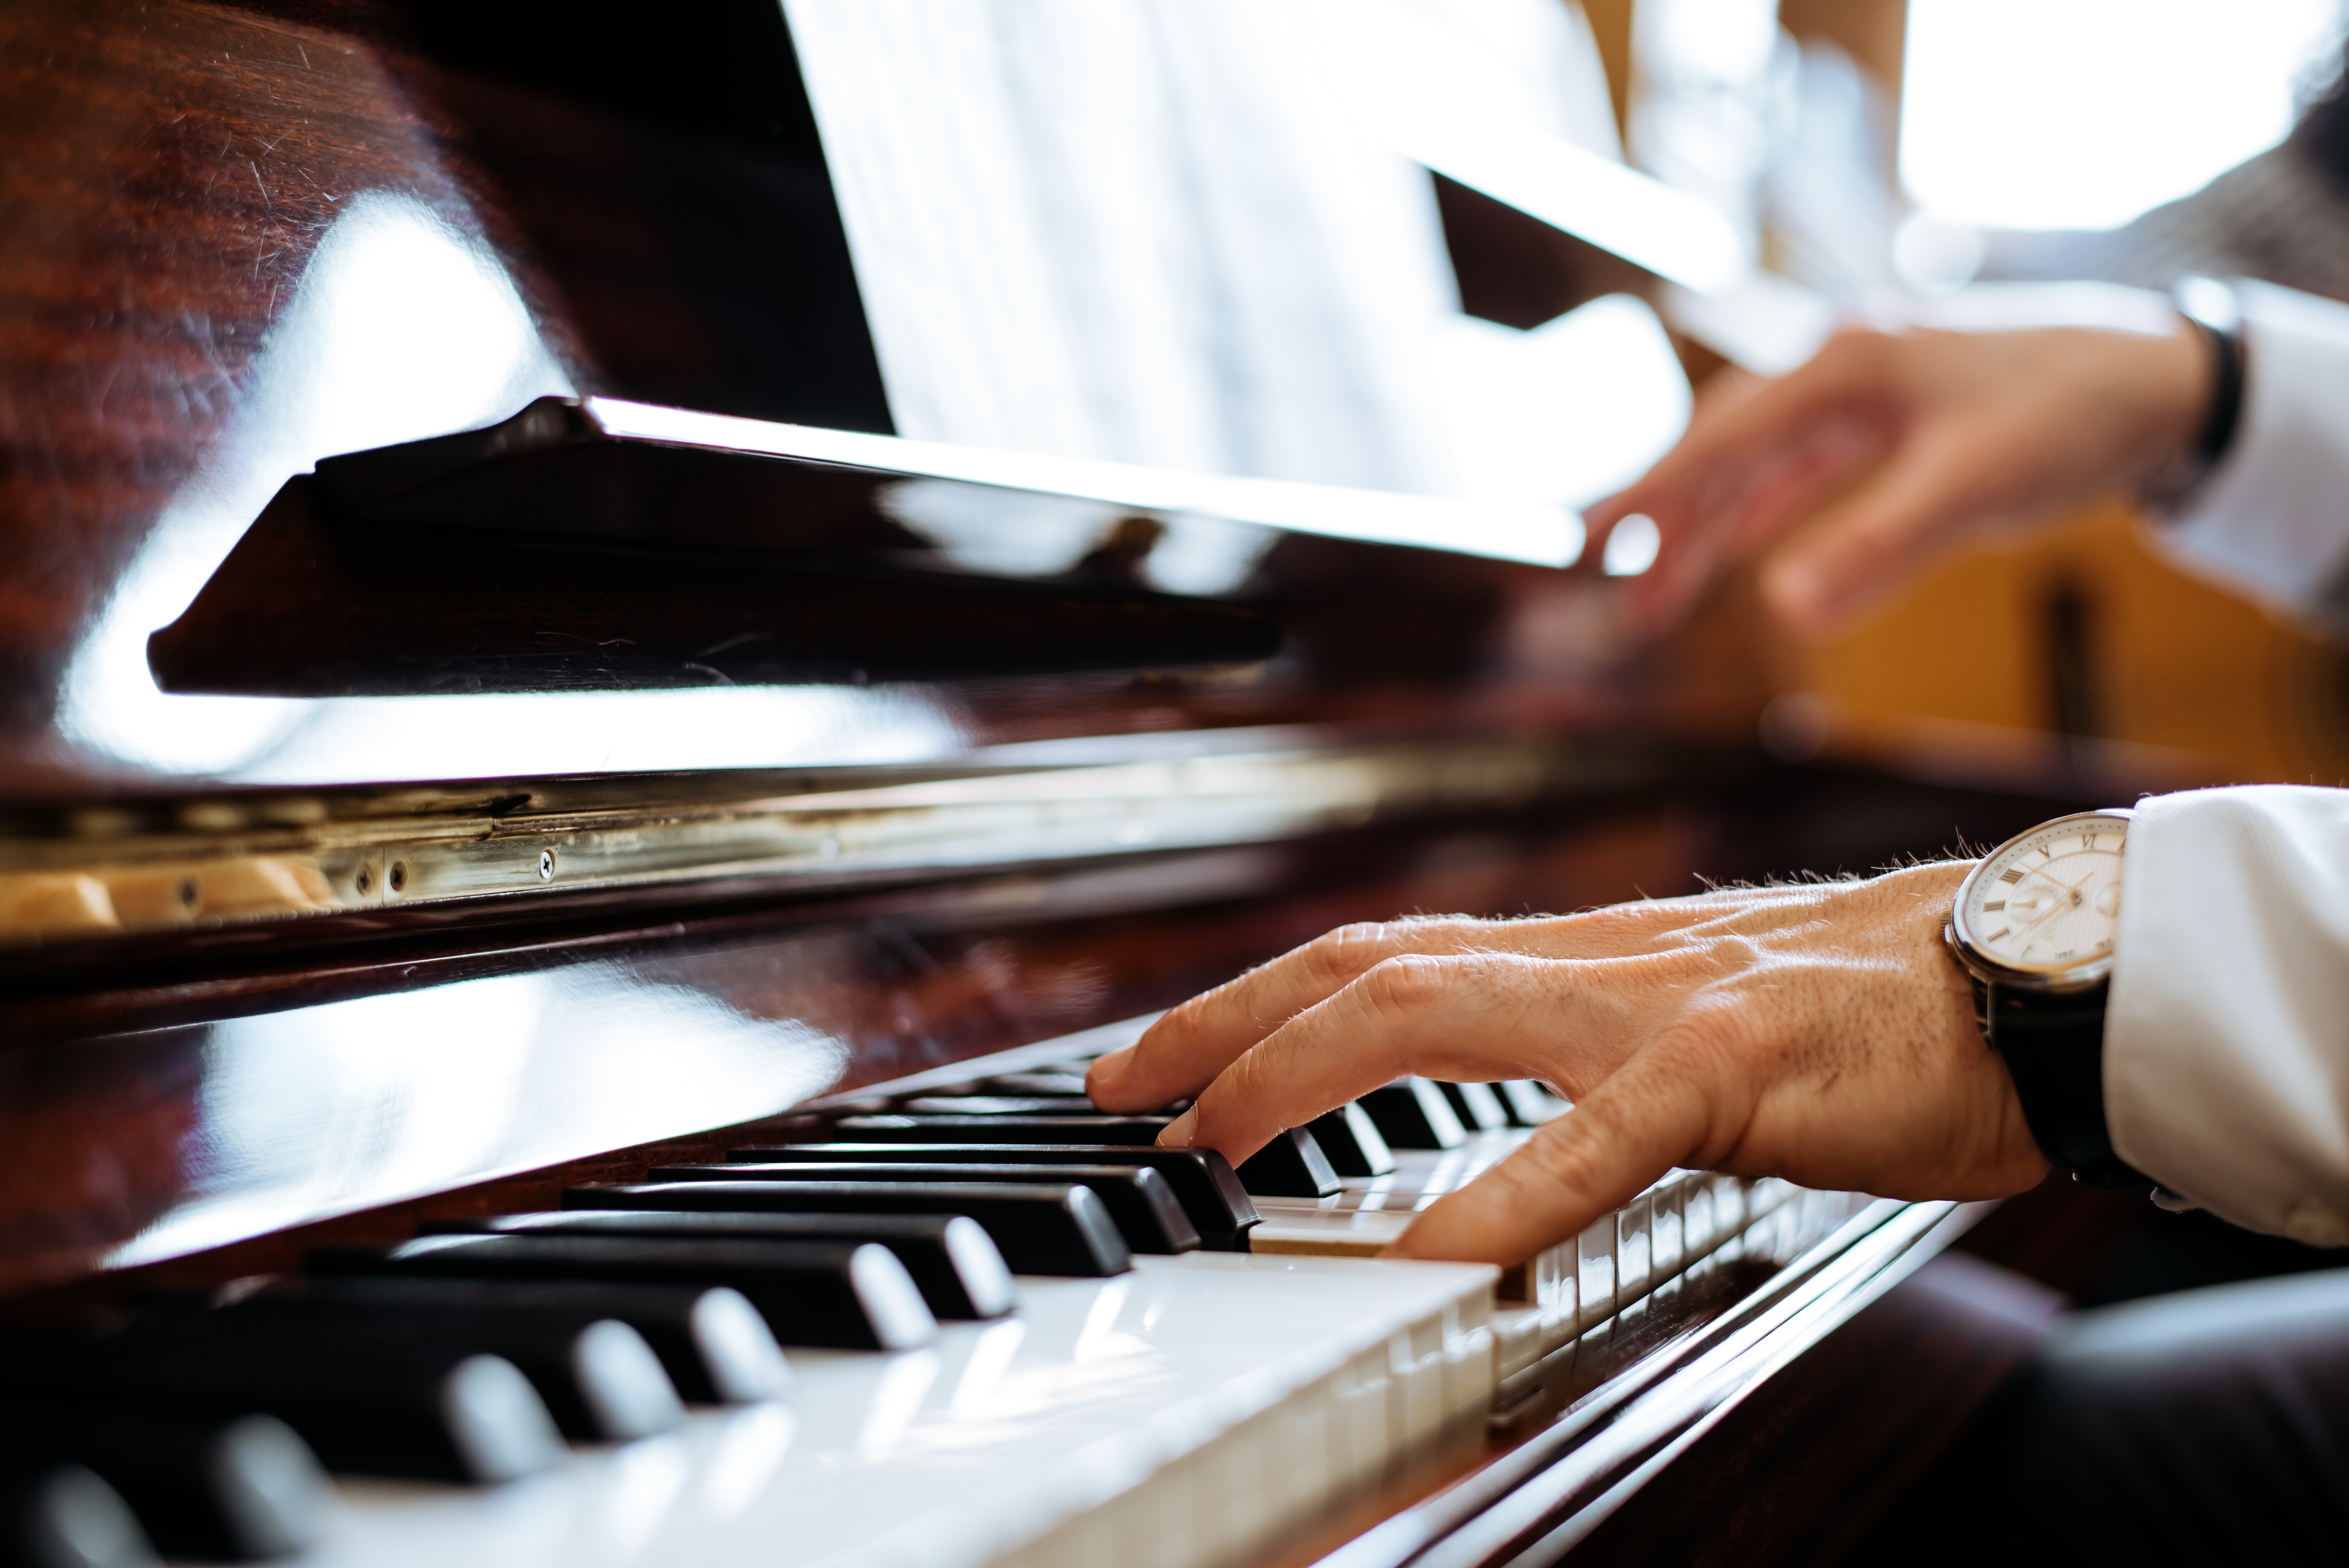 An adult who may be susceptible to perfectionism is playing the piano.